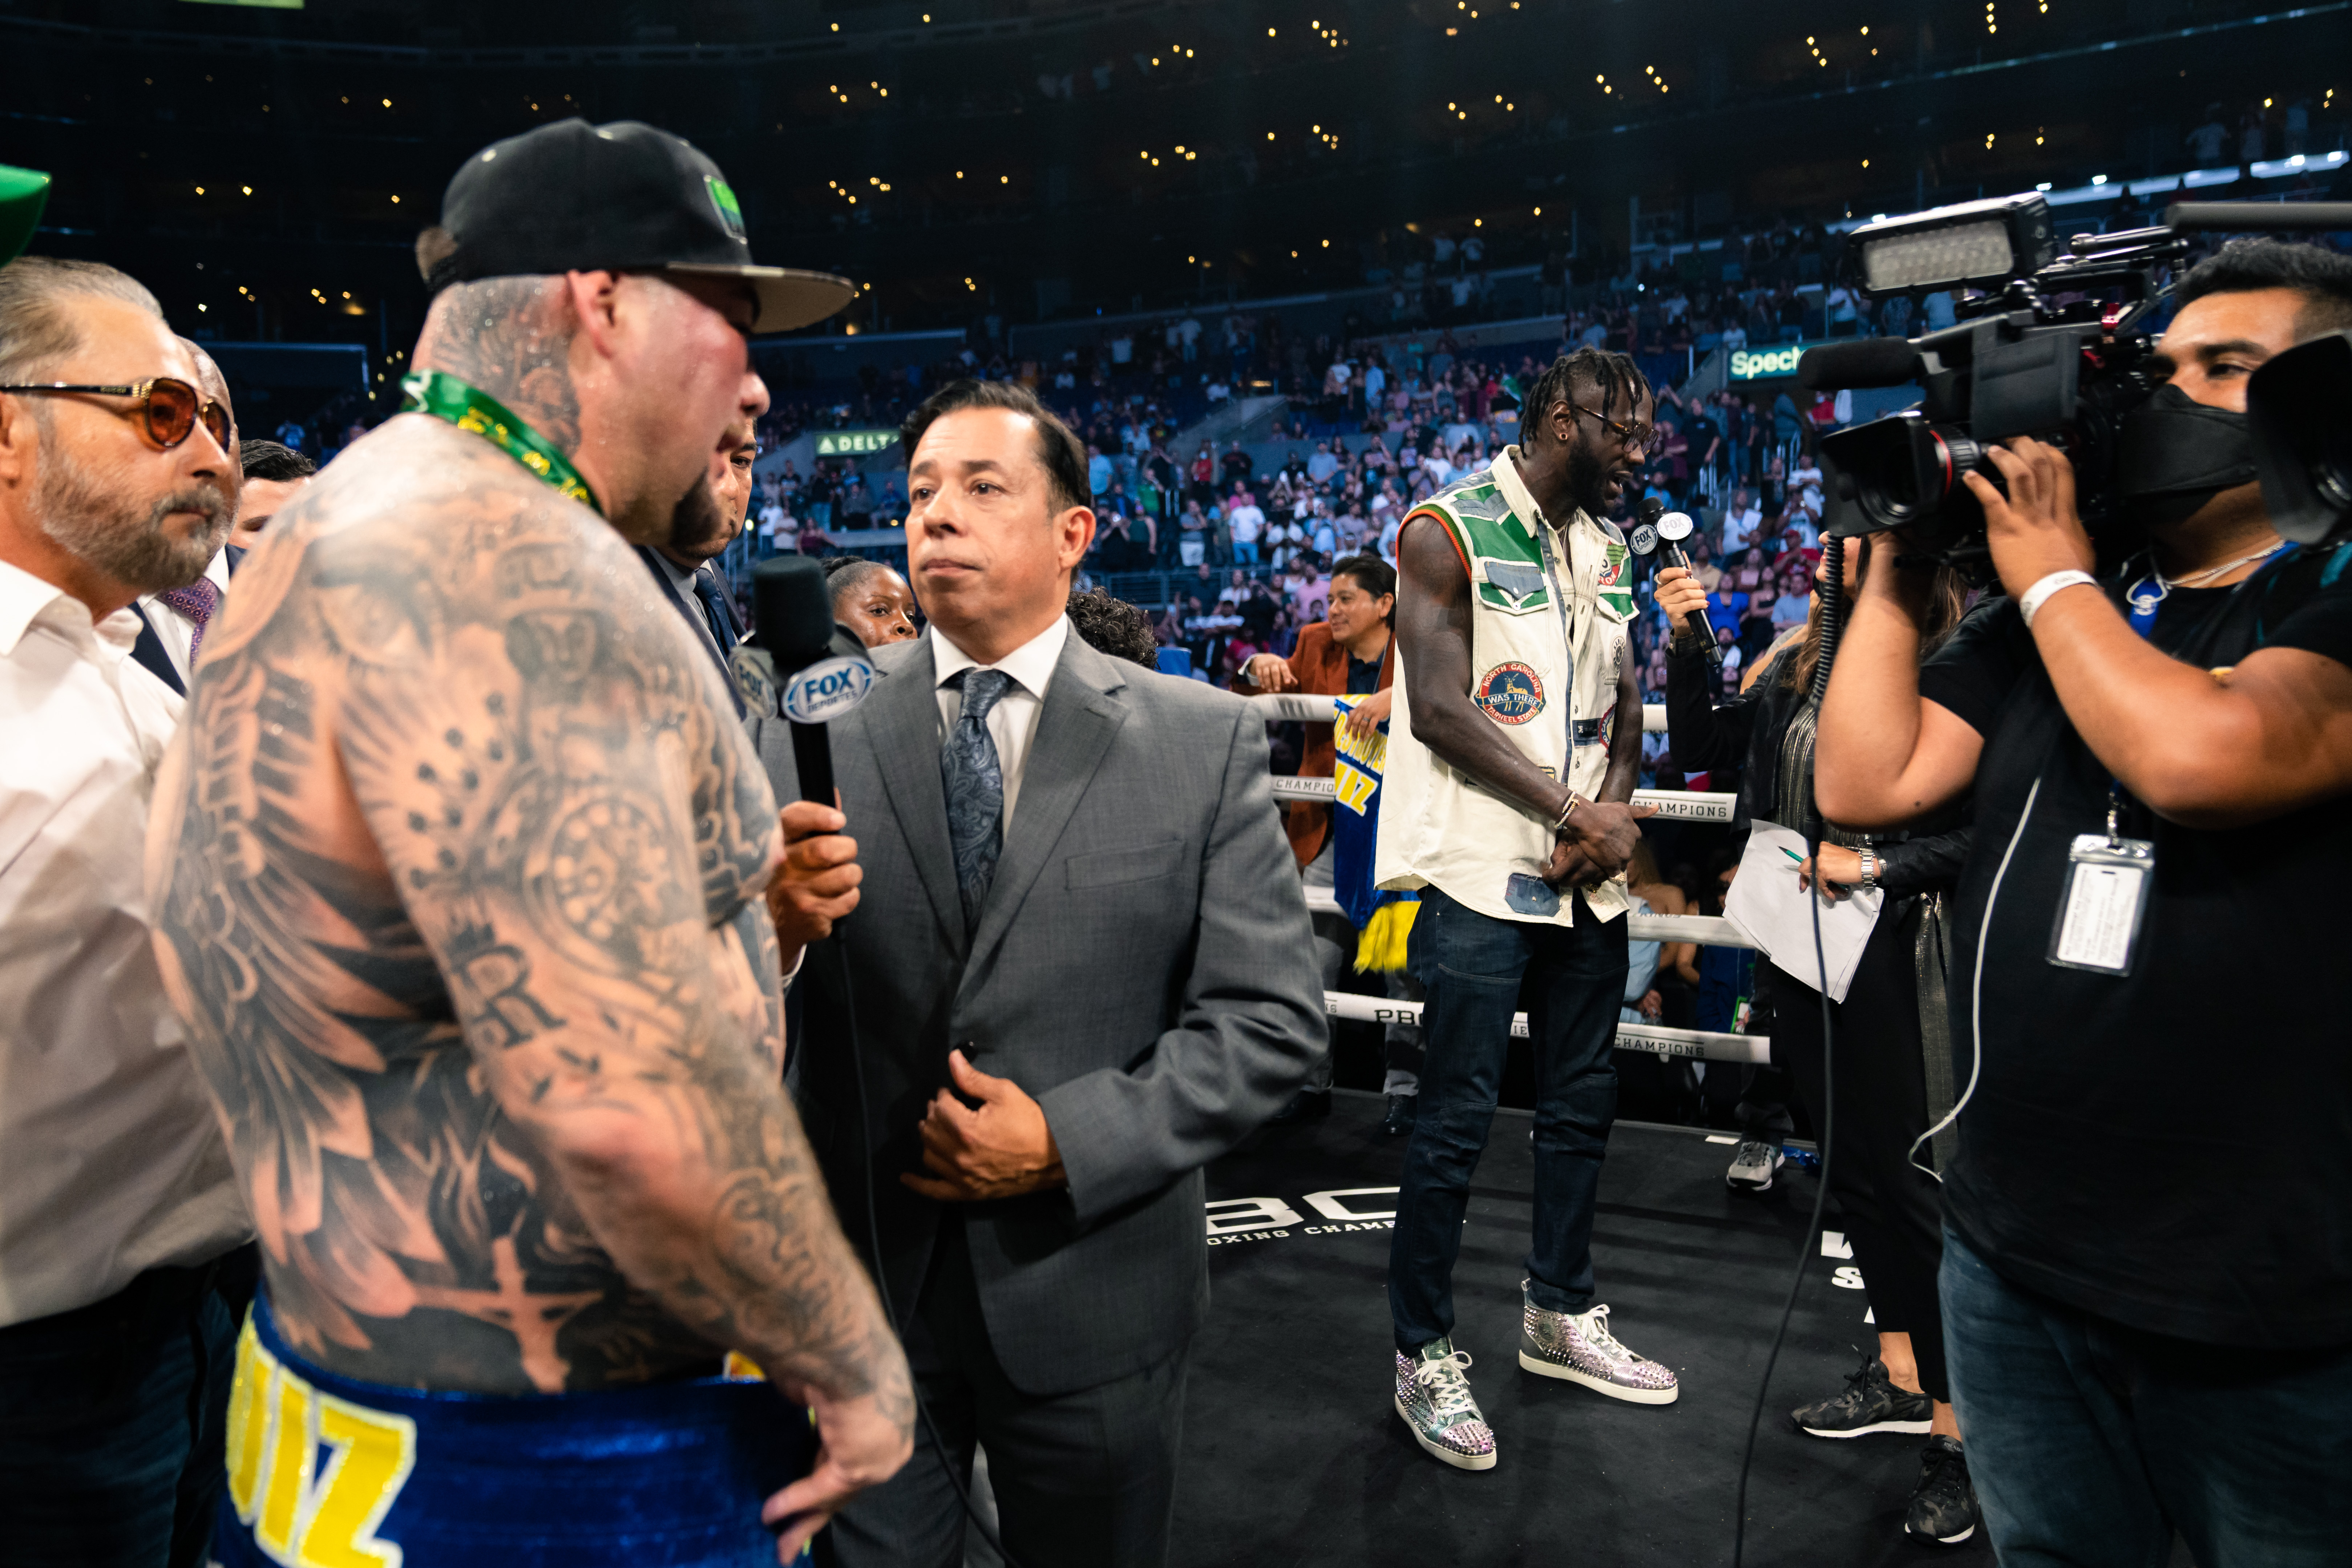 , ‘I can take a punch’ – Andy Ruiz Jr not fazed by Deontay Wilder’s brutal power with American rivals ordered into fight